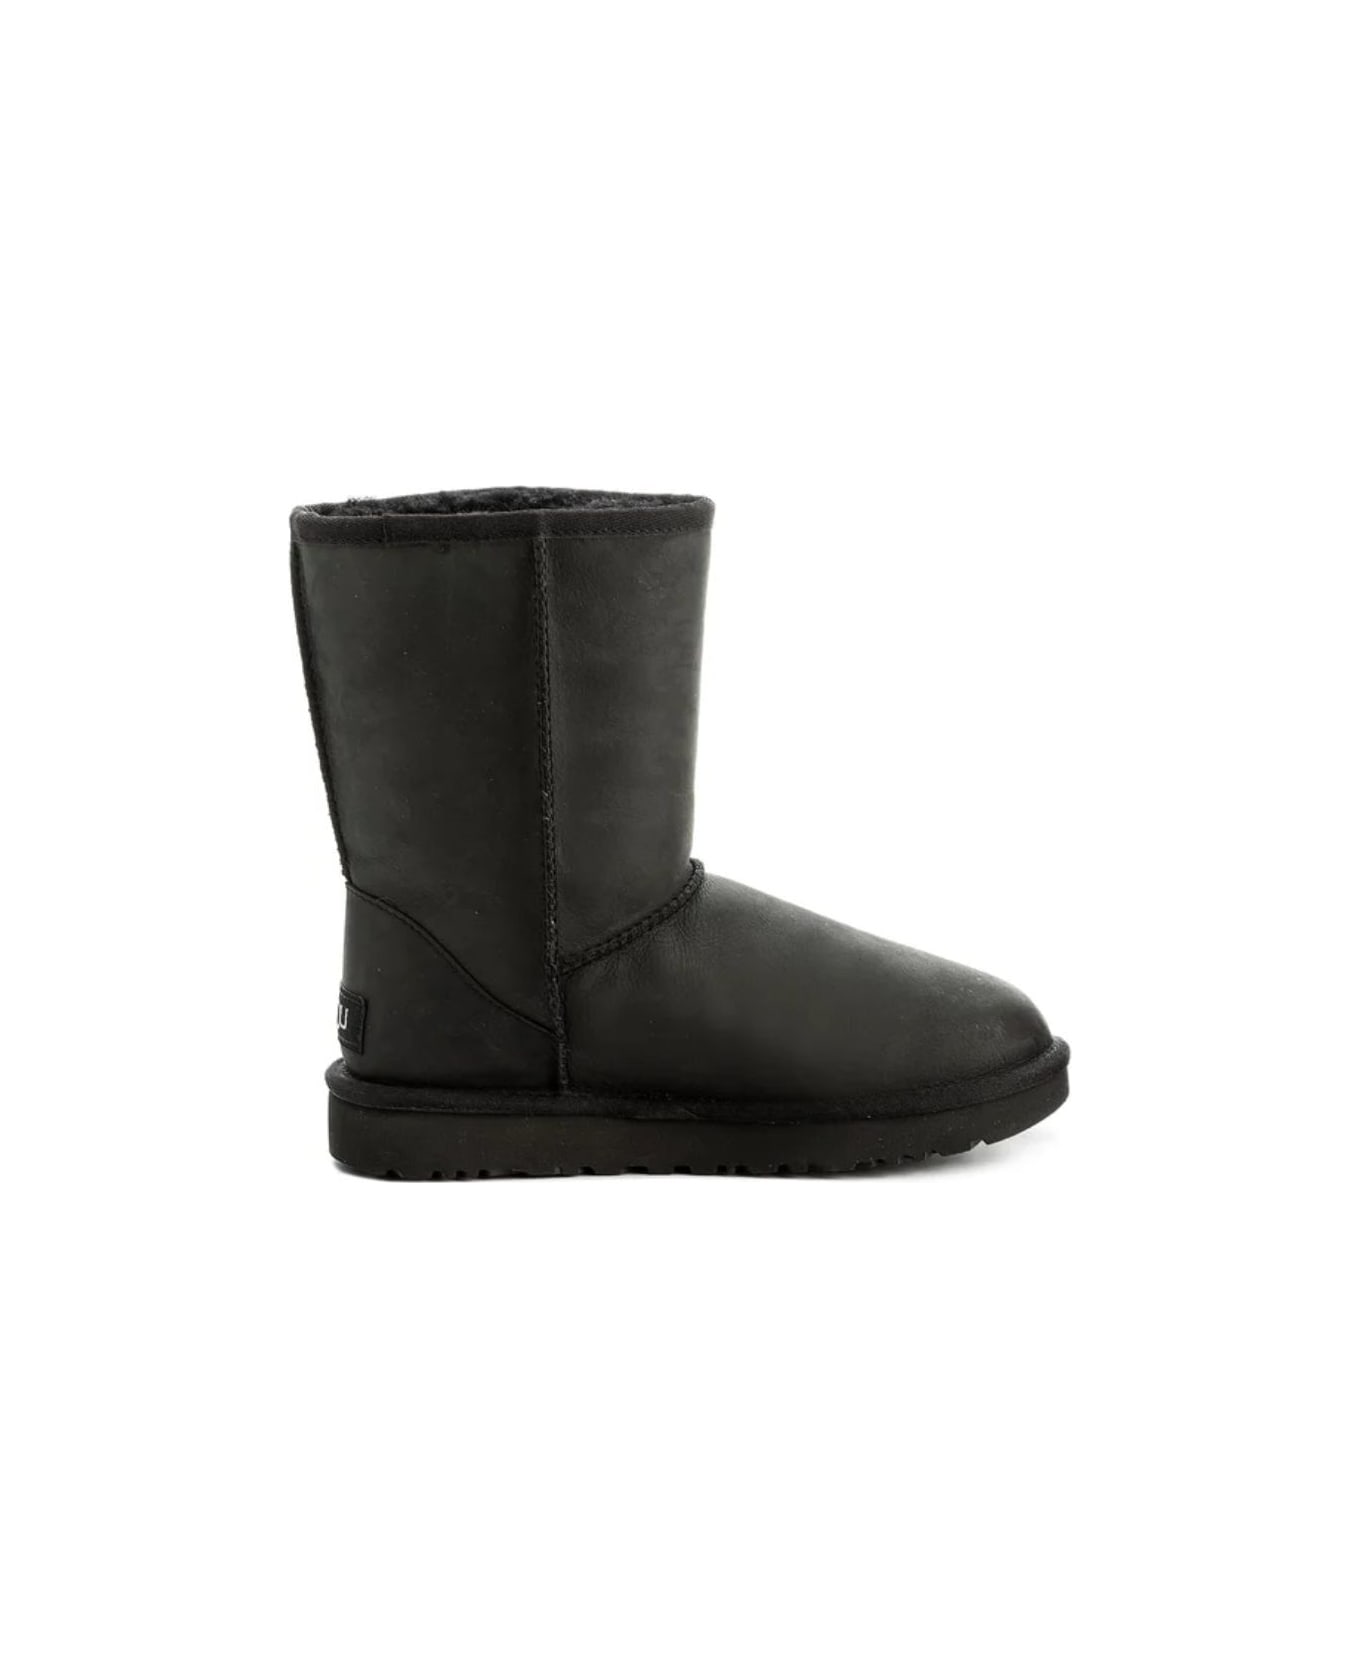 UGG W Classic Short Leather Shoes - Blk Black